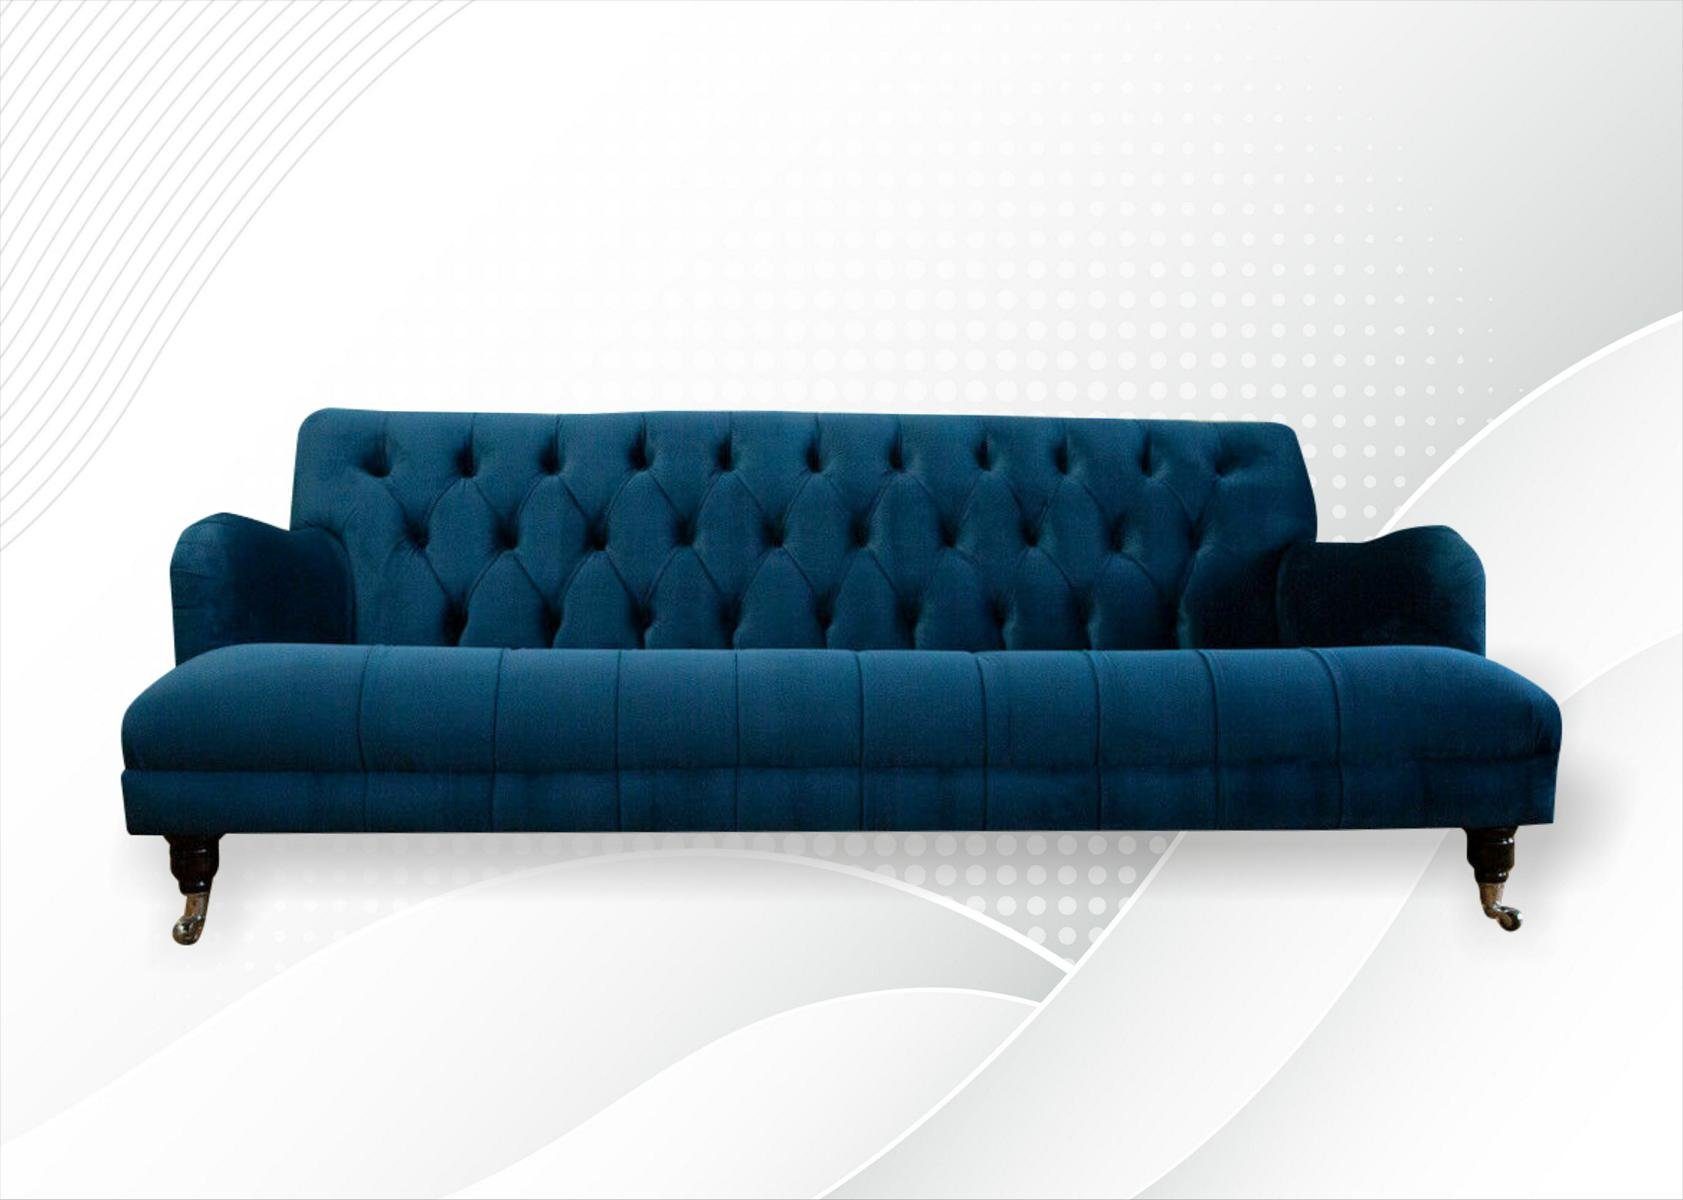 JVmoebel Chesterfield-Sofa Chesterfield 3 Sitzer Design Sofa Couch 190cm, Chesterfield 3 Sitzer Design Sofa Couch 190 cm